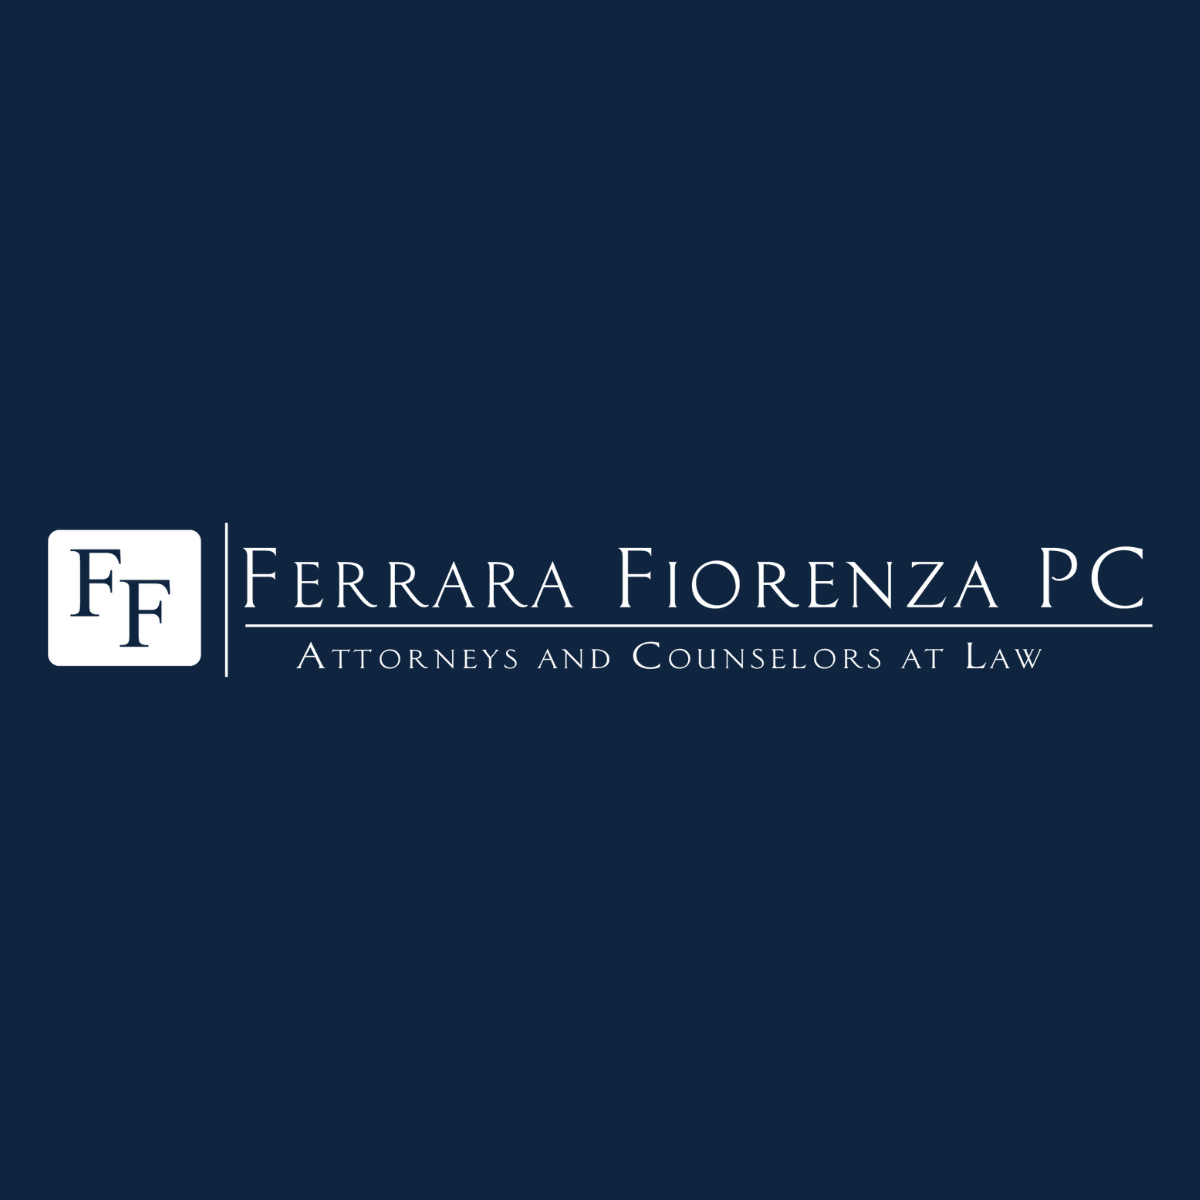 FERRARA FIORENZA PC ANNOUNCES  SETTLEMENT WITH JUUL LABS, INC. TOTALING MORE THAN $3.6 MILLION FOR PARTICIPATING NEW YORK STATE  SCHOOL DISTRICT CLIENTS